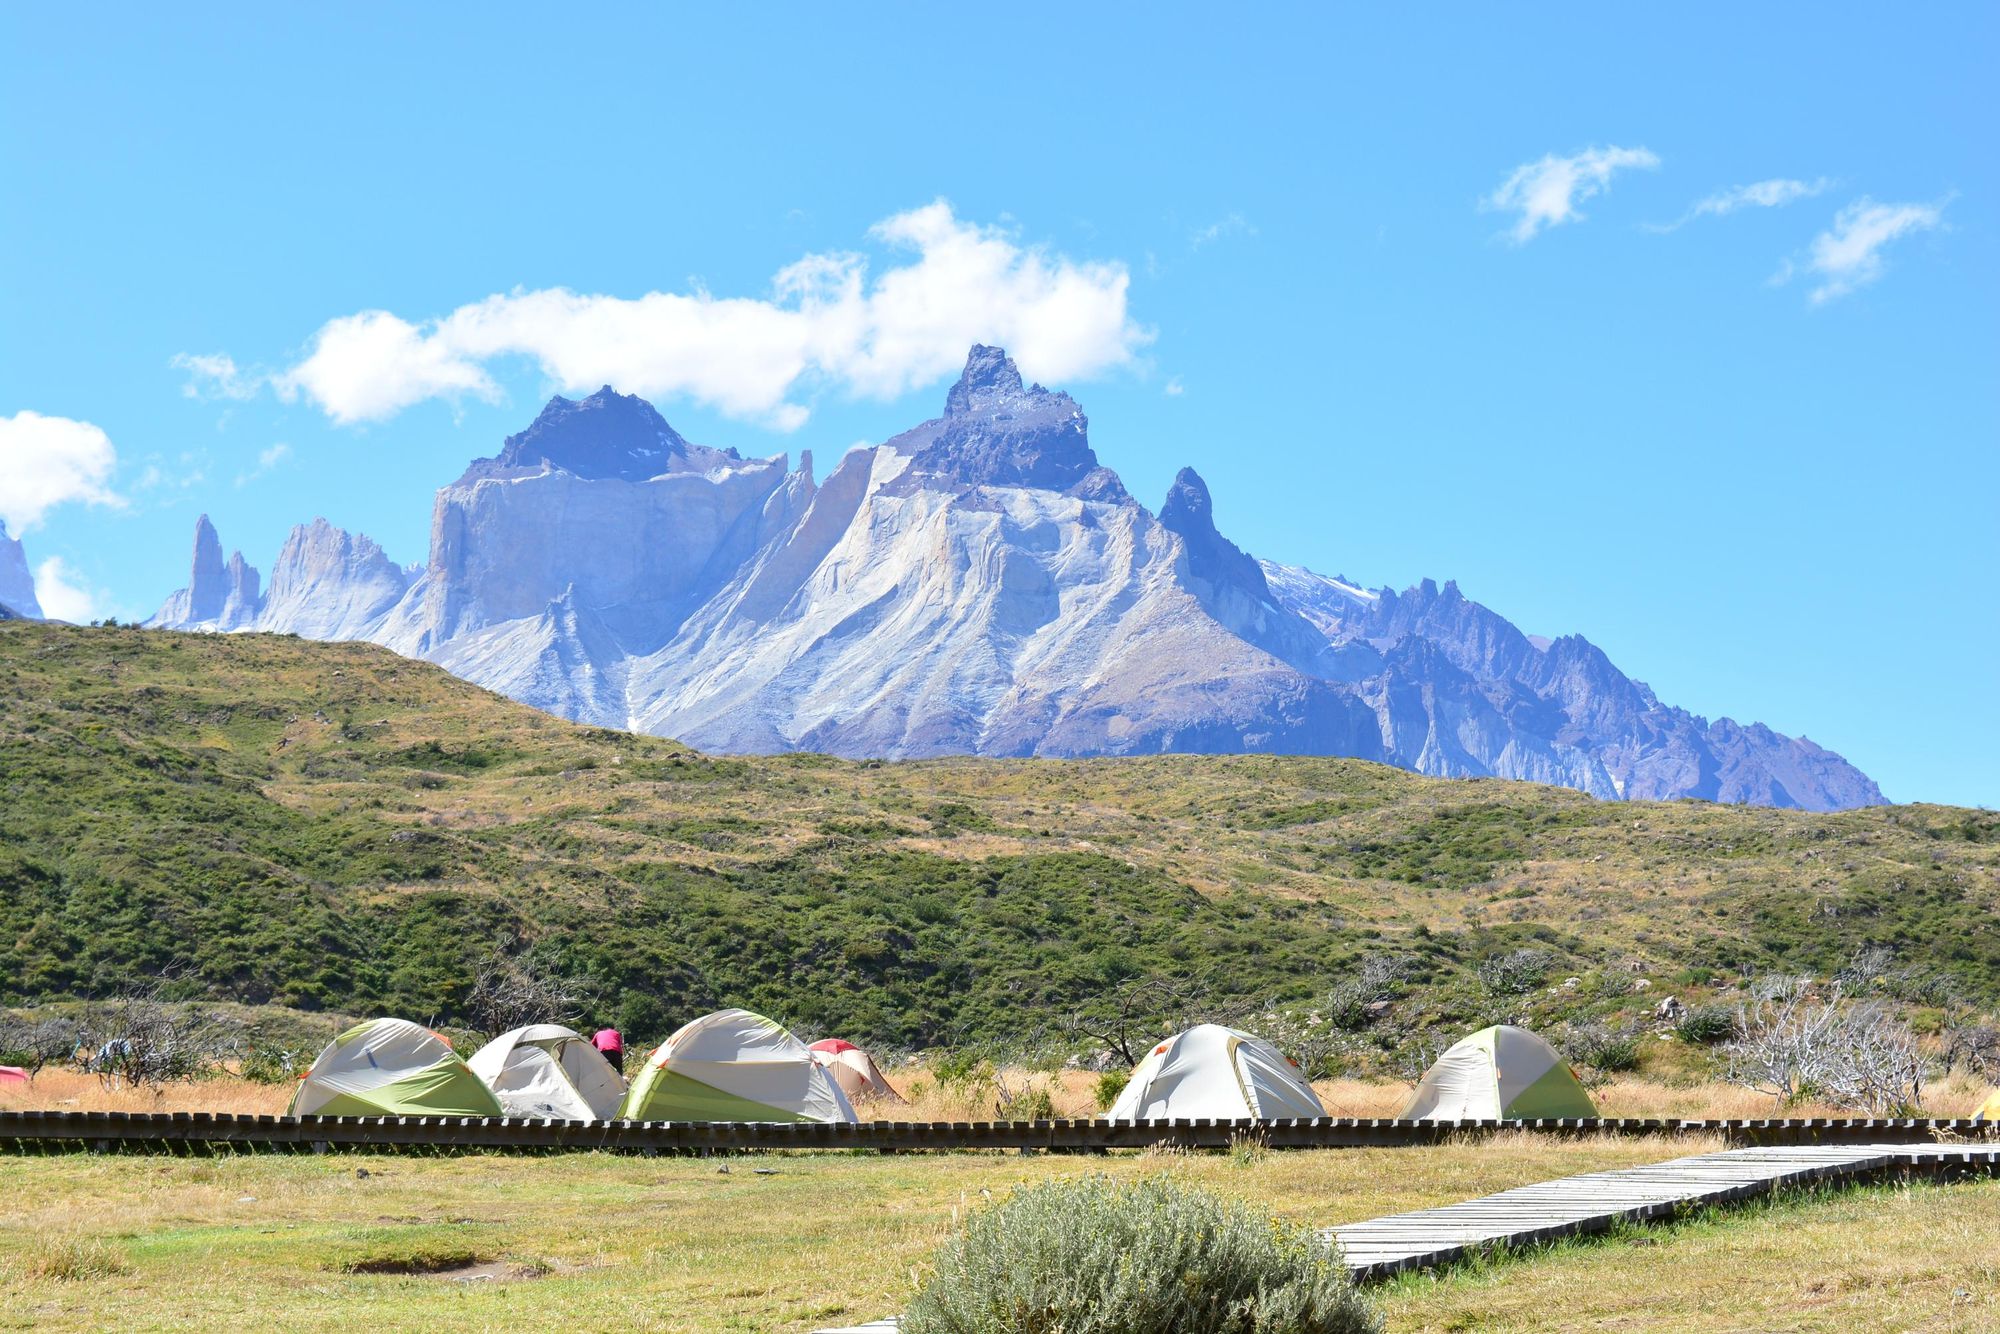 The campsites in Torres del Paine tend to come with a view. Photo: Getty